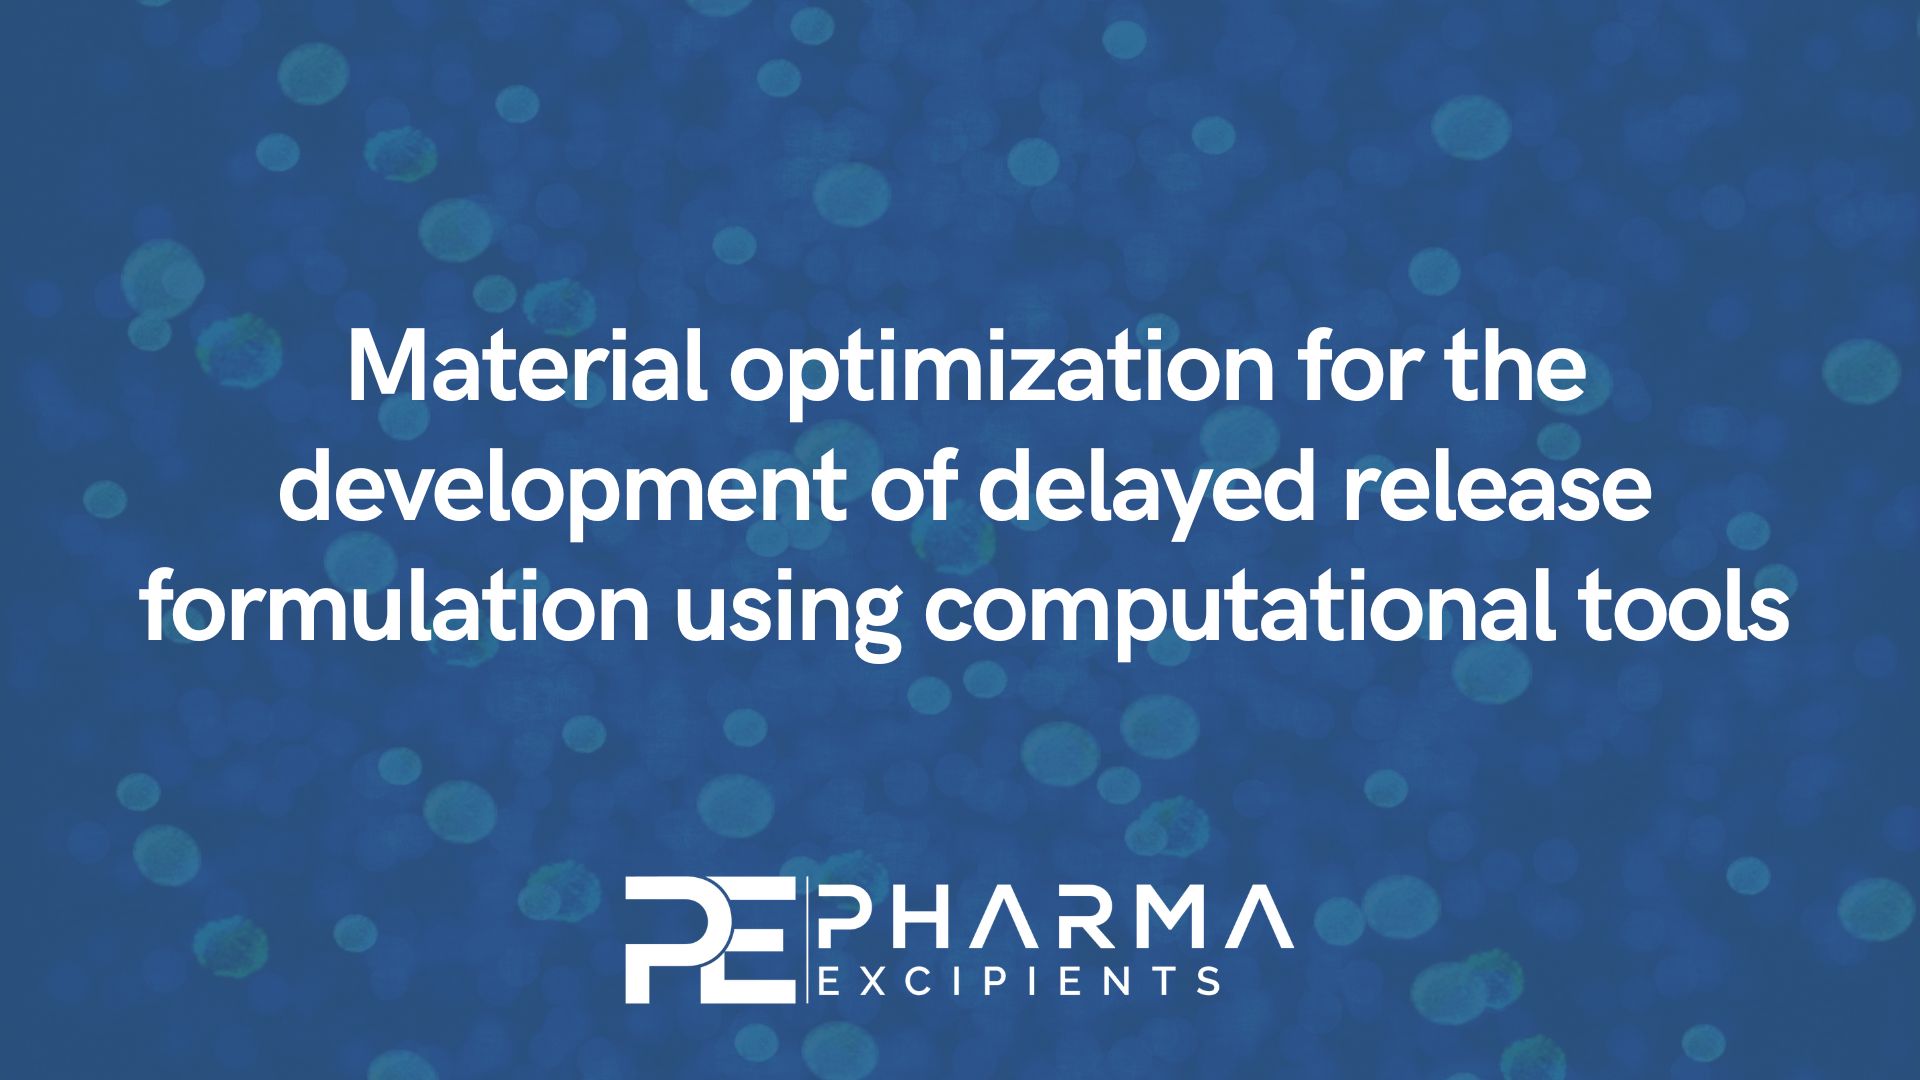 Material optimization for the development of delayed release formulation using computational tools